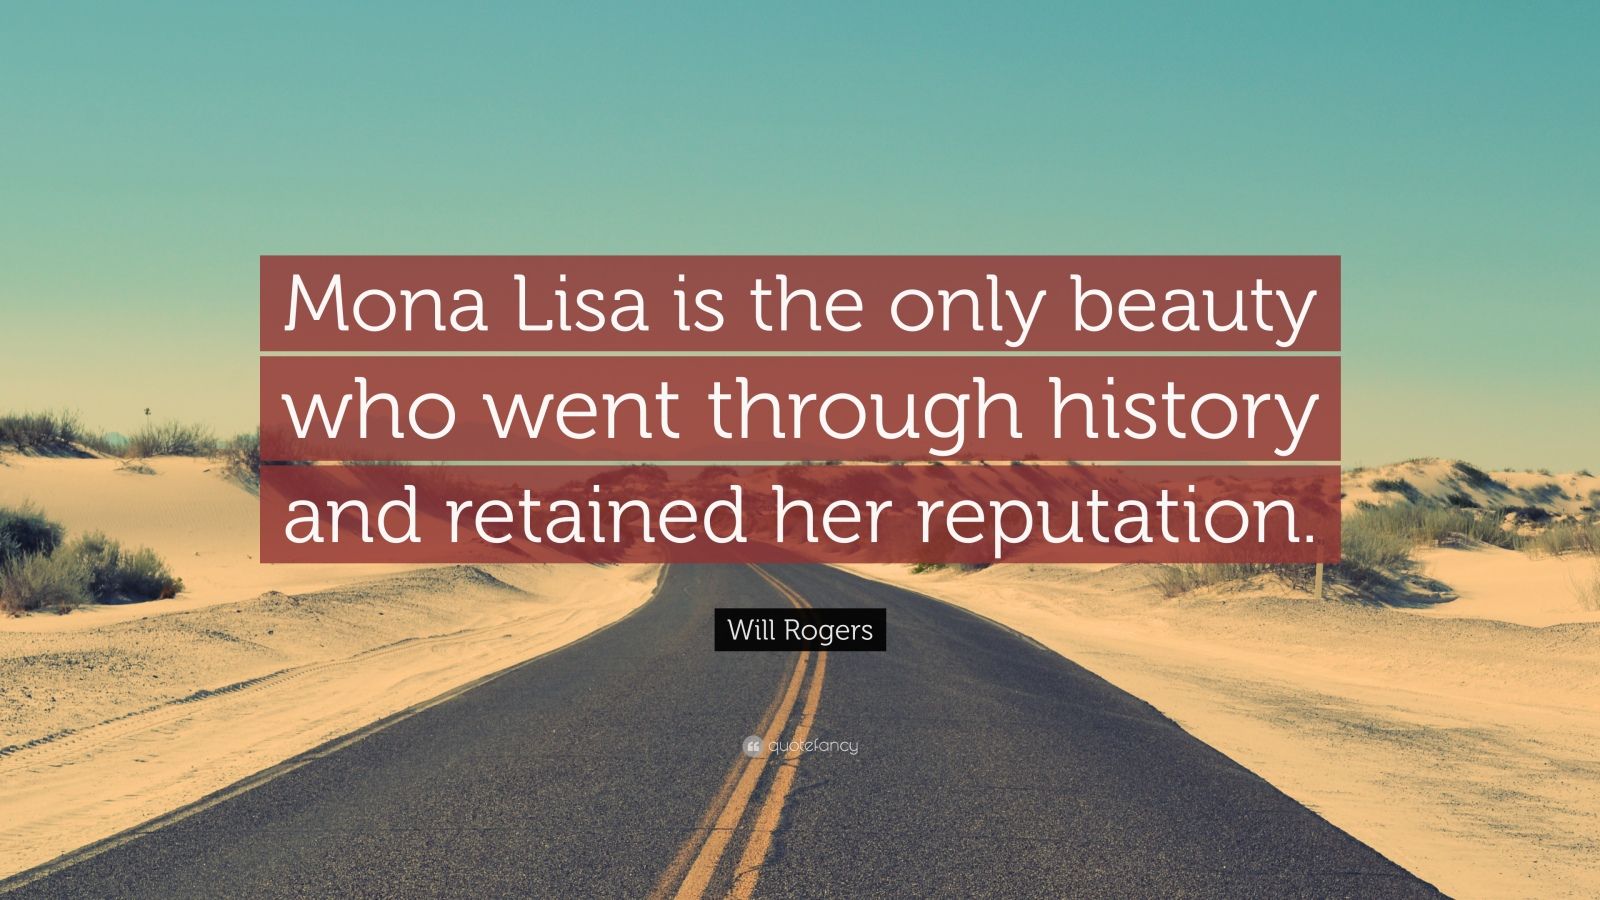 Will Rogers Quote: “Mona Lisa is the only beauty who went through